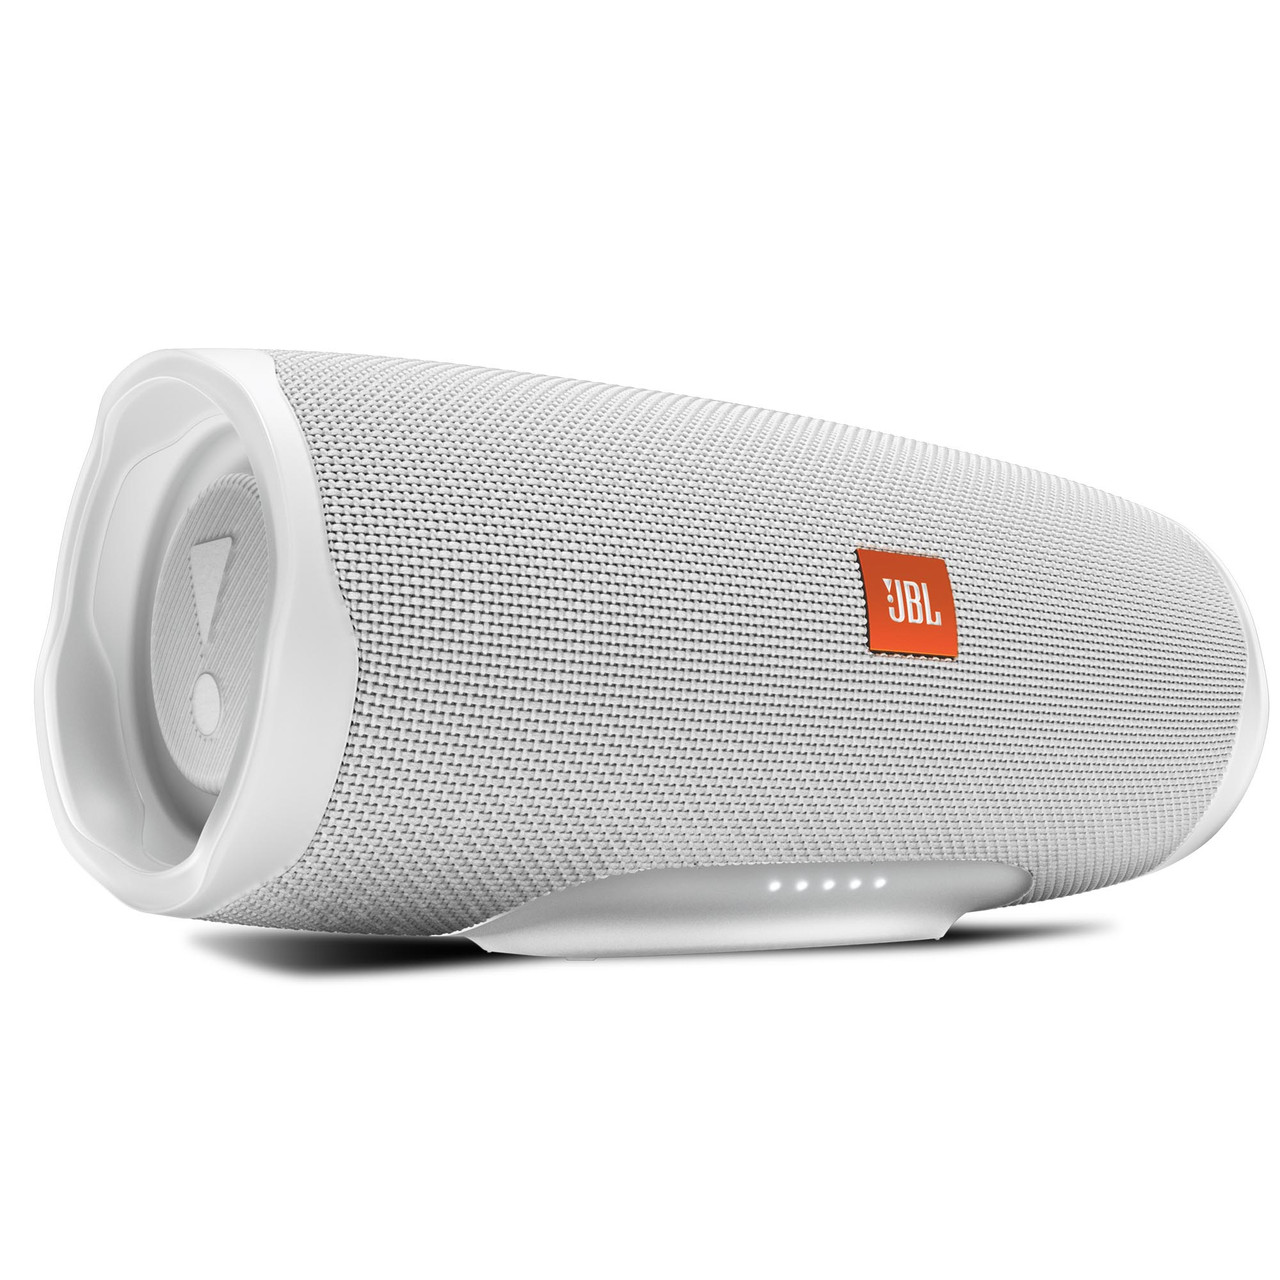 Rough sleep Luske Lappe JBL CHARGE4 White Waterproof portable Bluetooth speaker with 20 hours of  playtime - Creative Audio